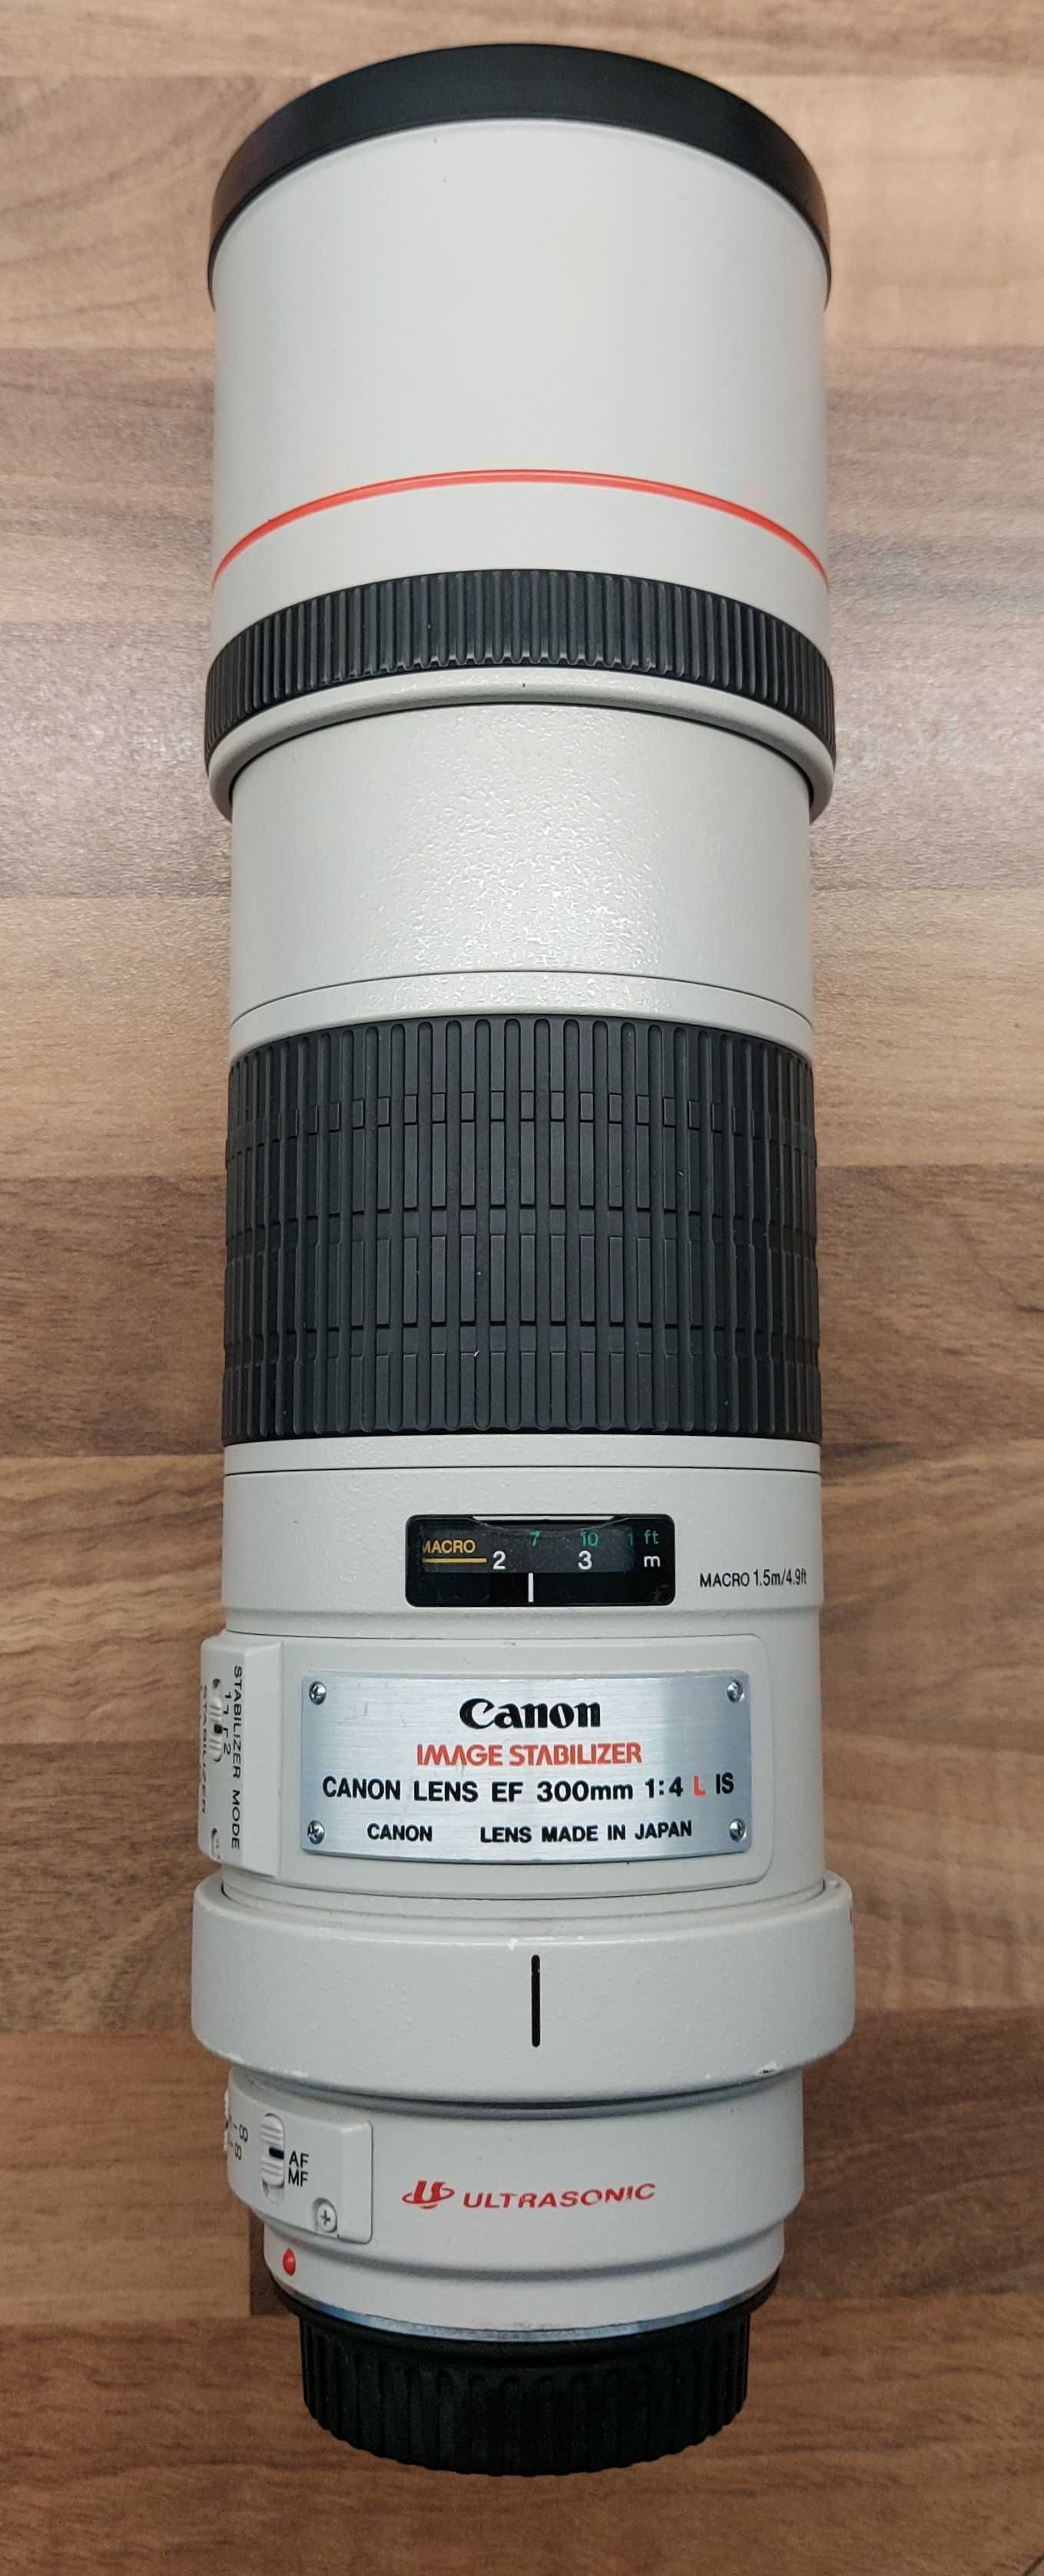 Canon 300 mm f 1:4 L IS